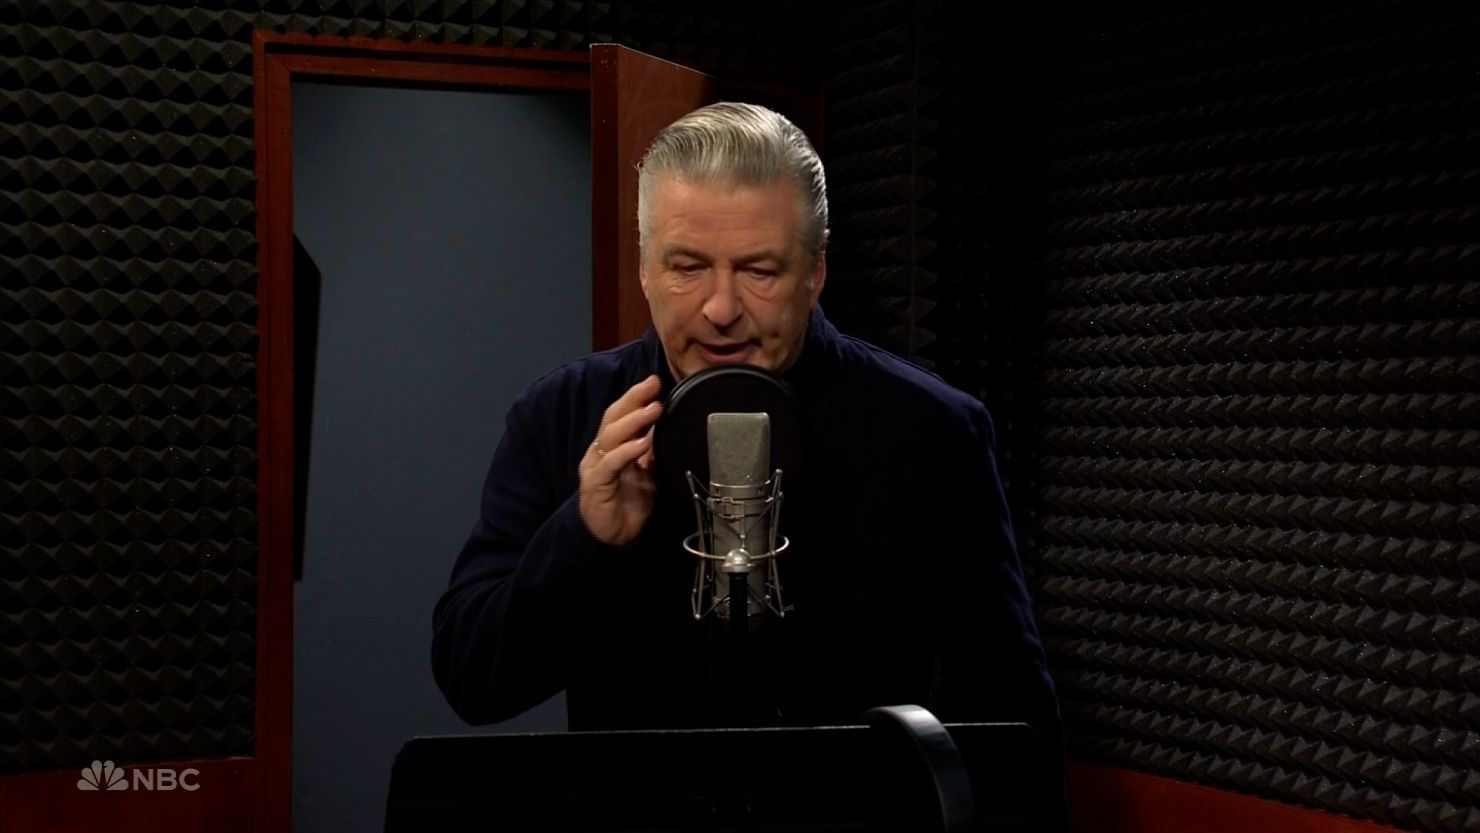 Alec Baldwin on this weekend's episode of "Saturday Night Live."